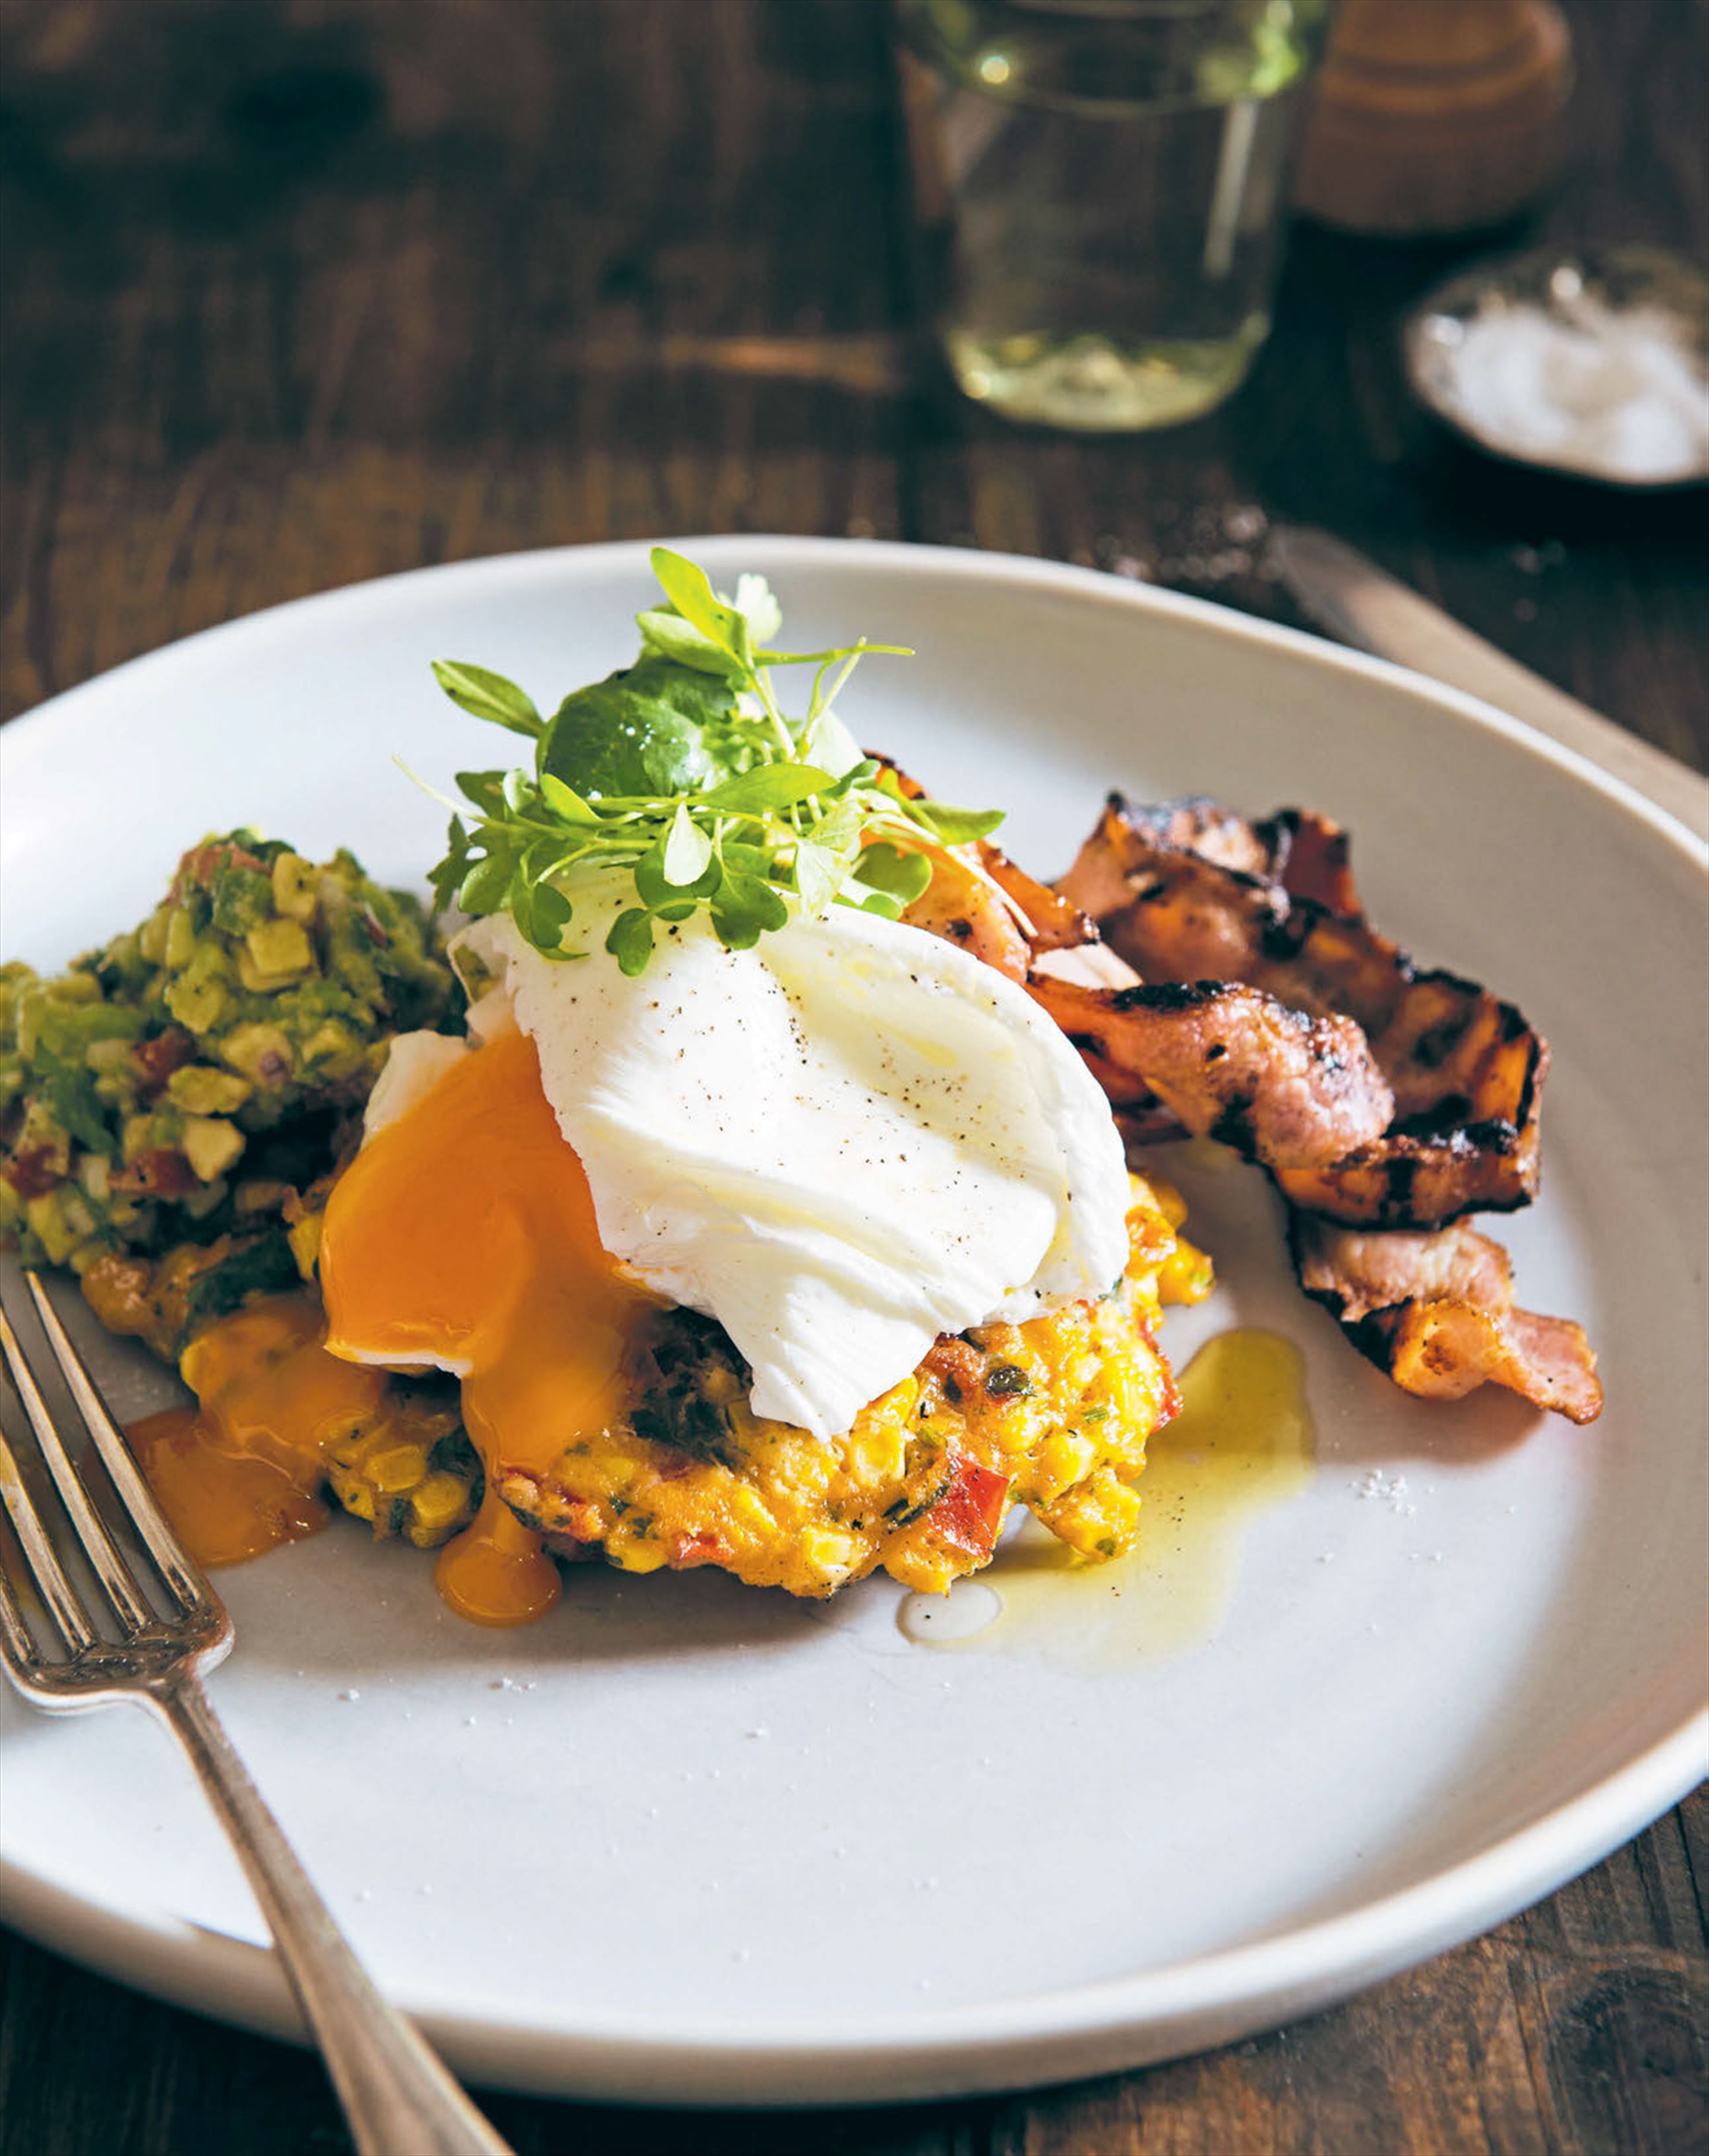 Corn cakes with grilled bacon, avocado salsa & poached eggs